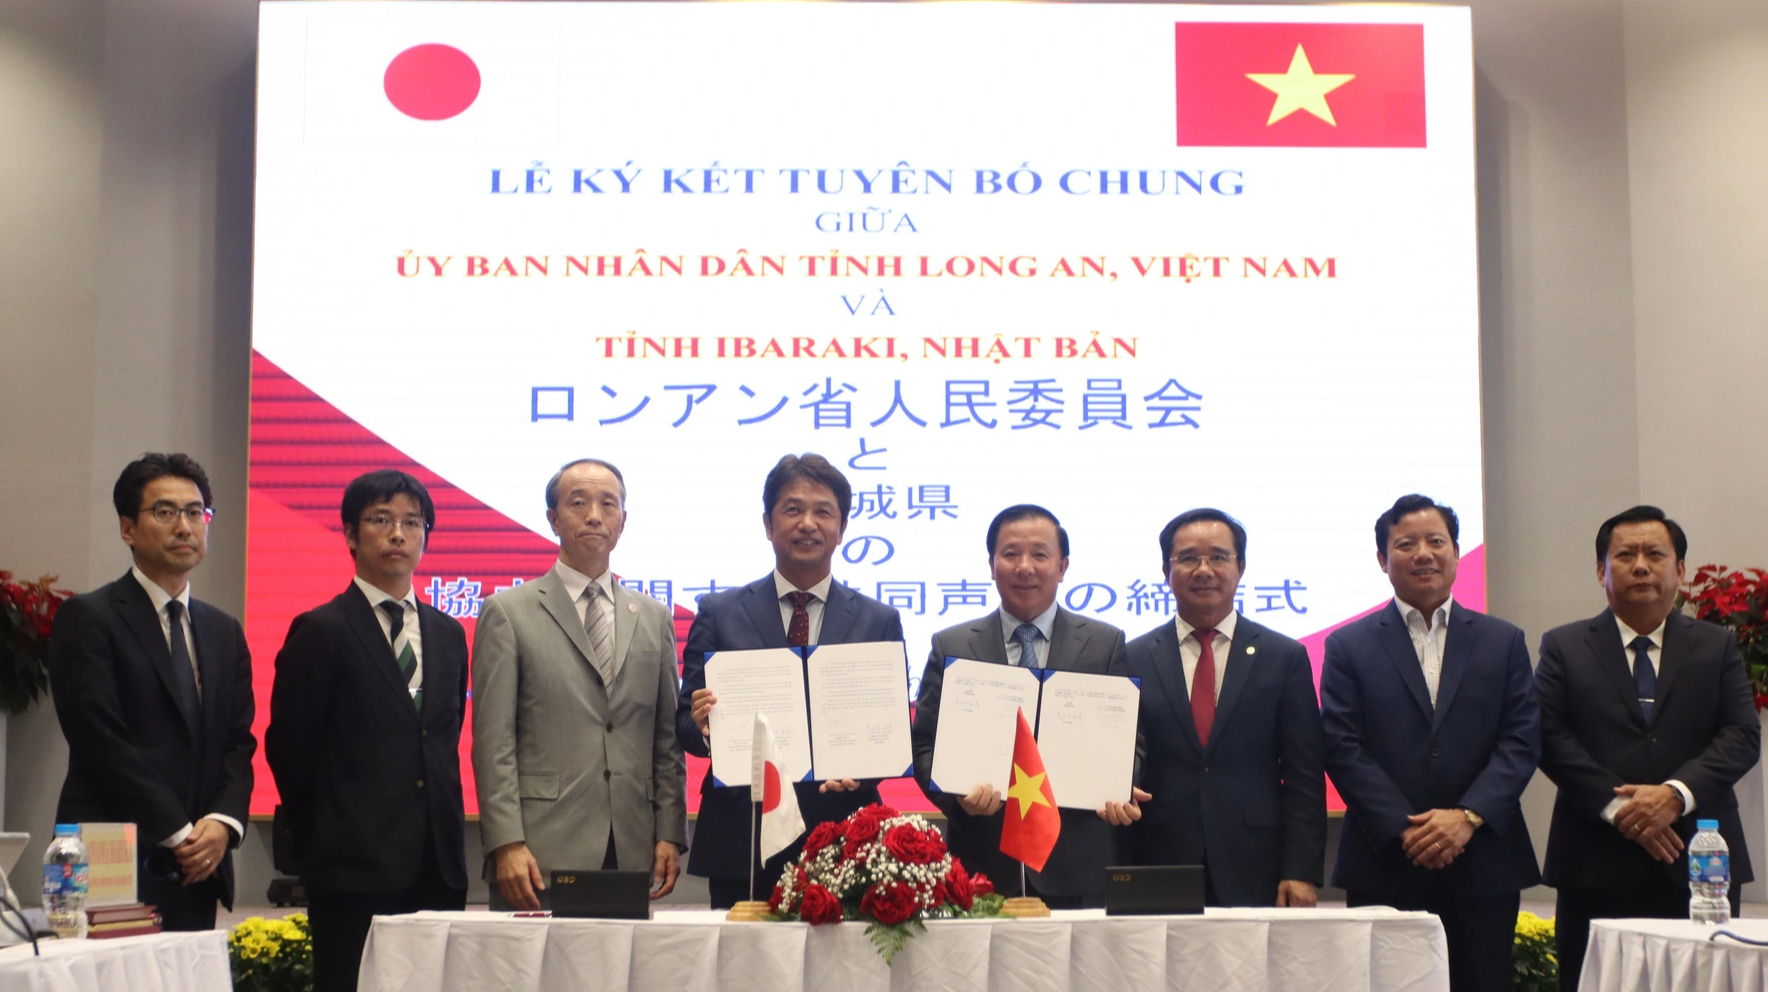 Officials of Long An Province and Ibaraki prefecture sign a joint statement to enhance their relations, July 28, 2023. Photo: An Long / Tuoi Tre